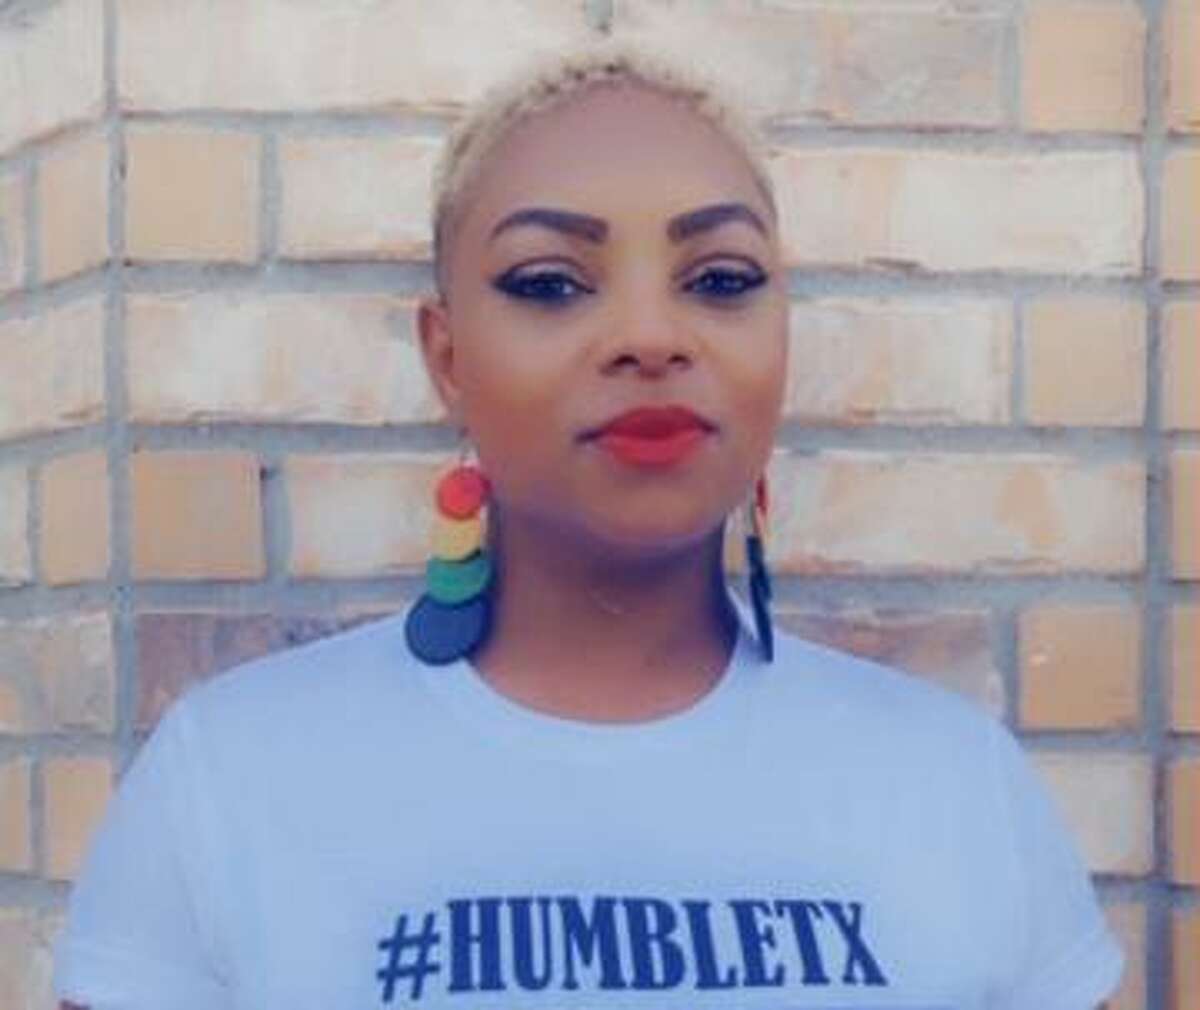 Akilah Glaspie, owner of The Gingerbread School, organized the Humble TX Stand Up event being held on July 19  that in turn grew into more of an unofficial organization.